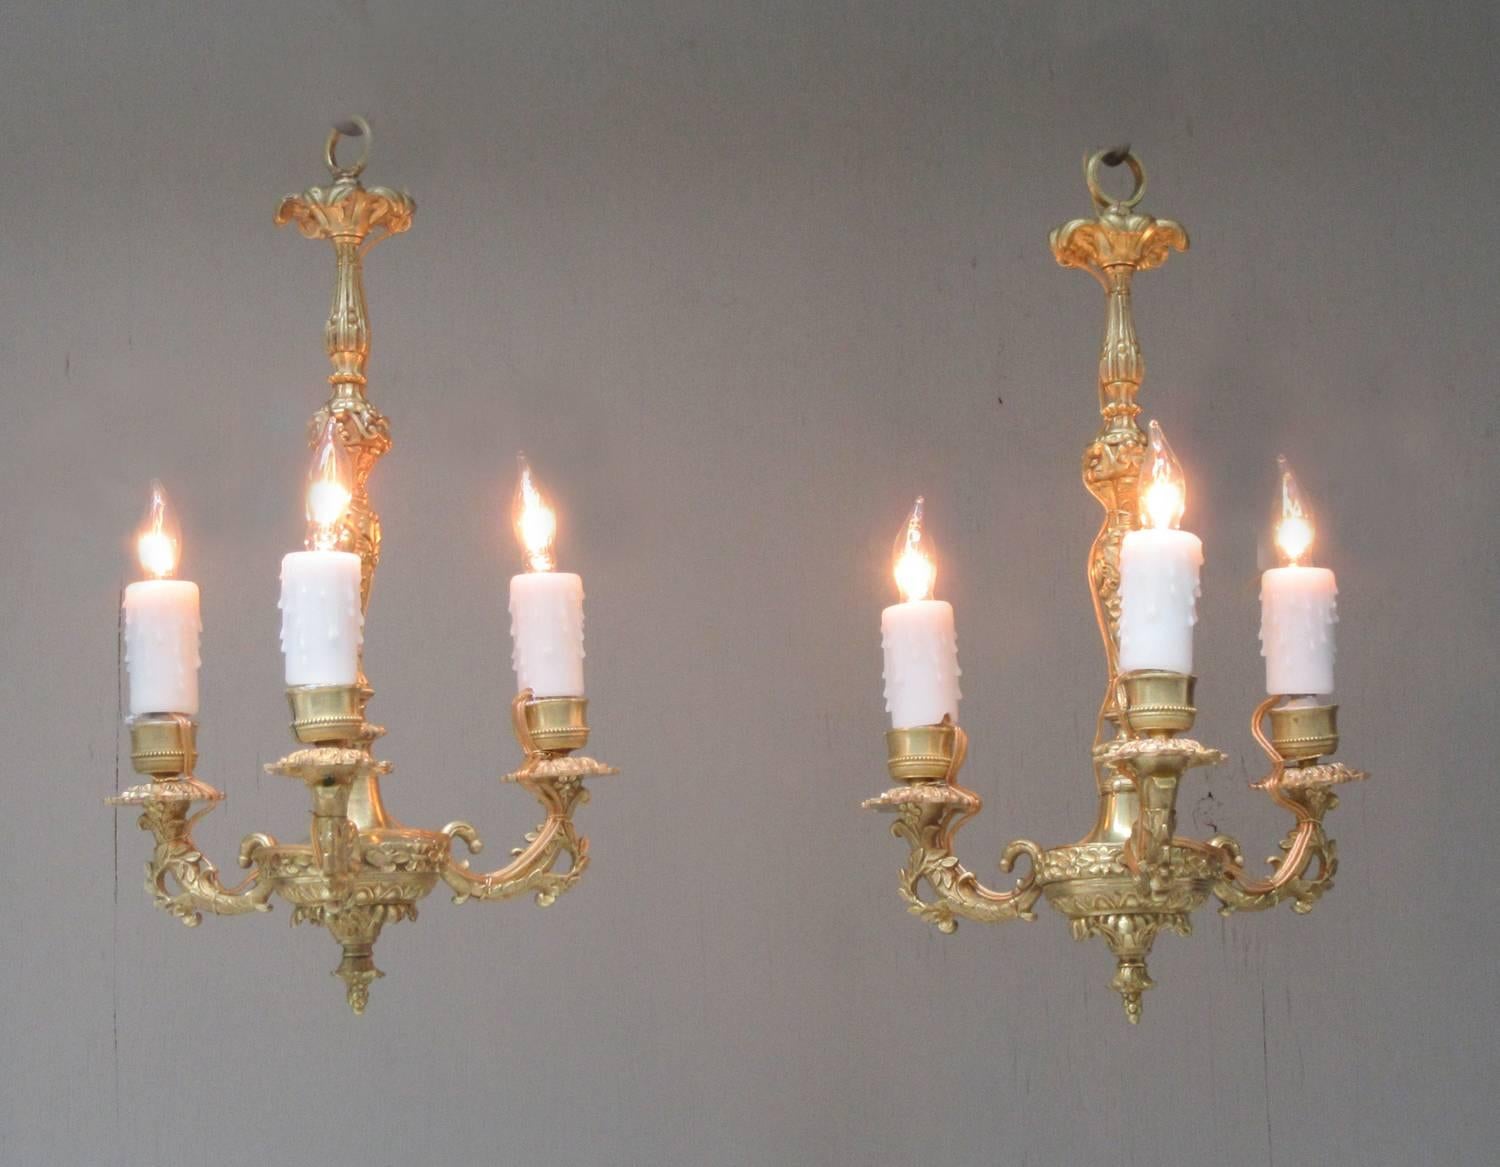 A diminutive pair of French Louis XIV bronze doré chandeliers, circa 1810, featuring finely detailed casting and three candle arms. The pair were originally candle but have recently been French wired with new porcelain sockets.